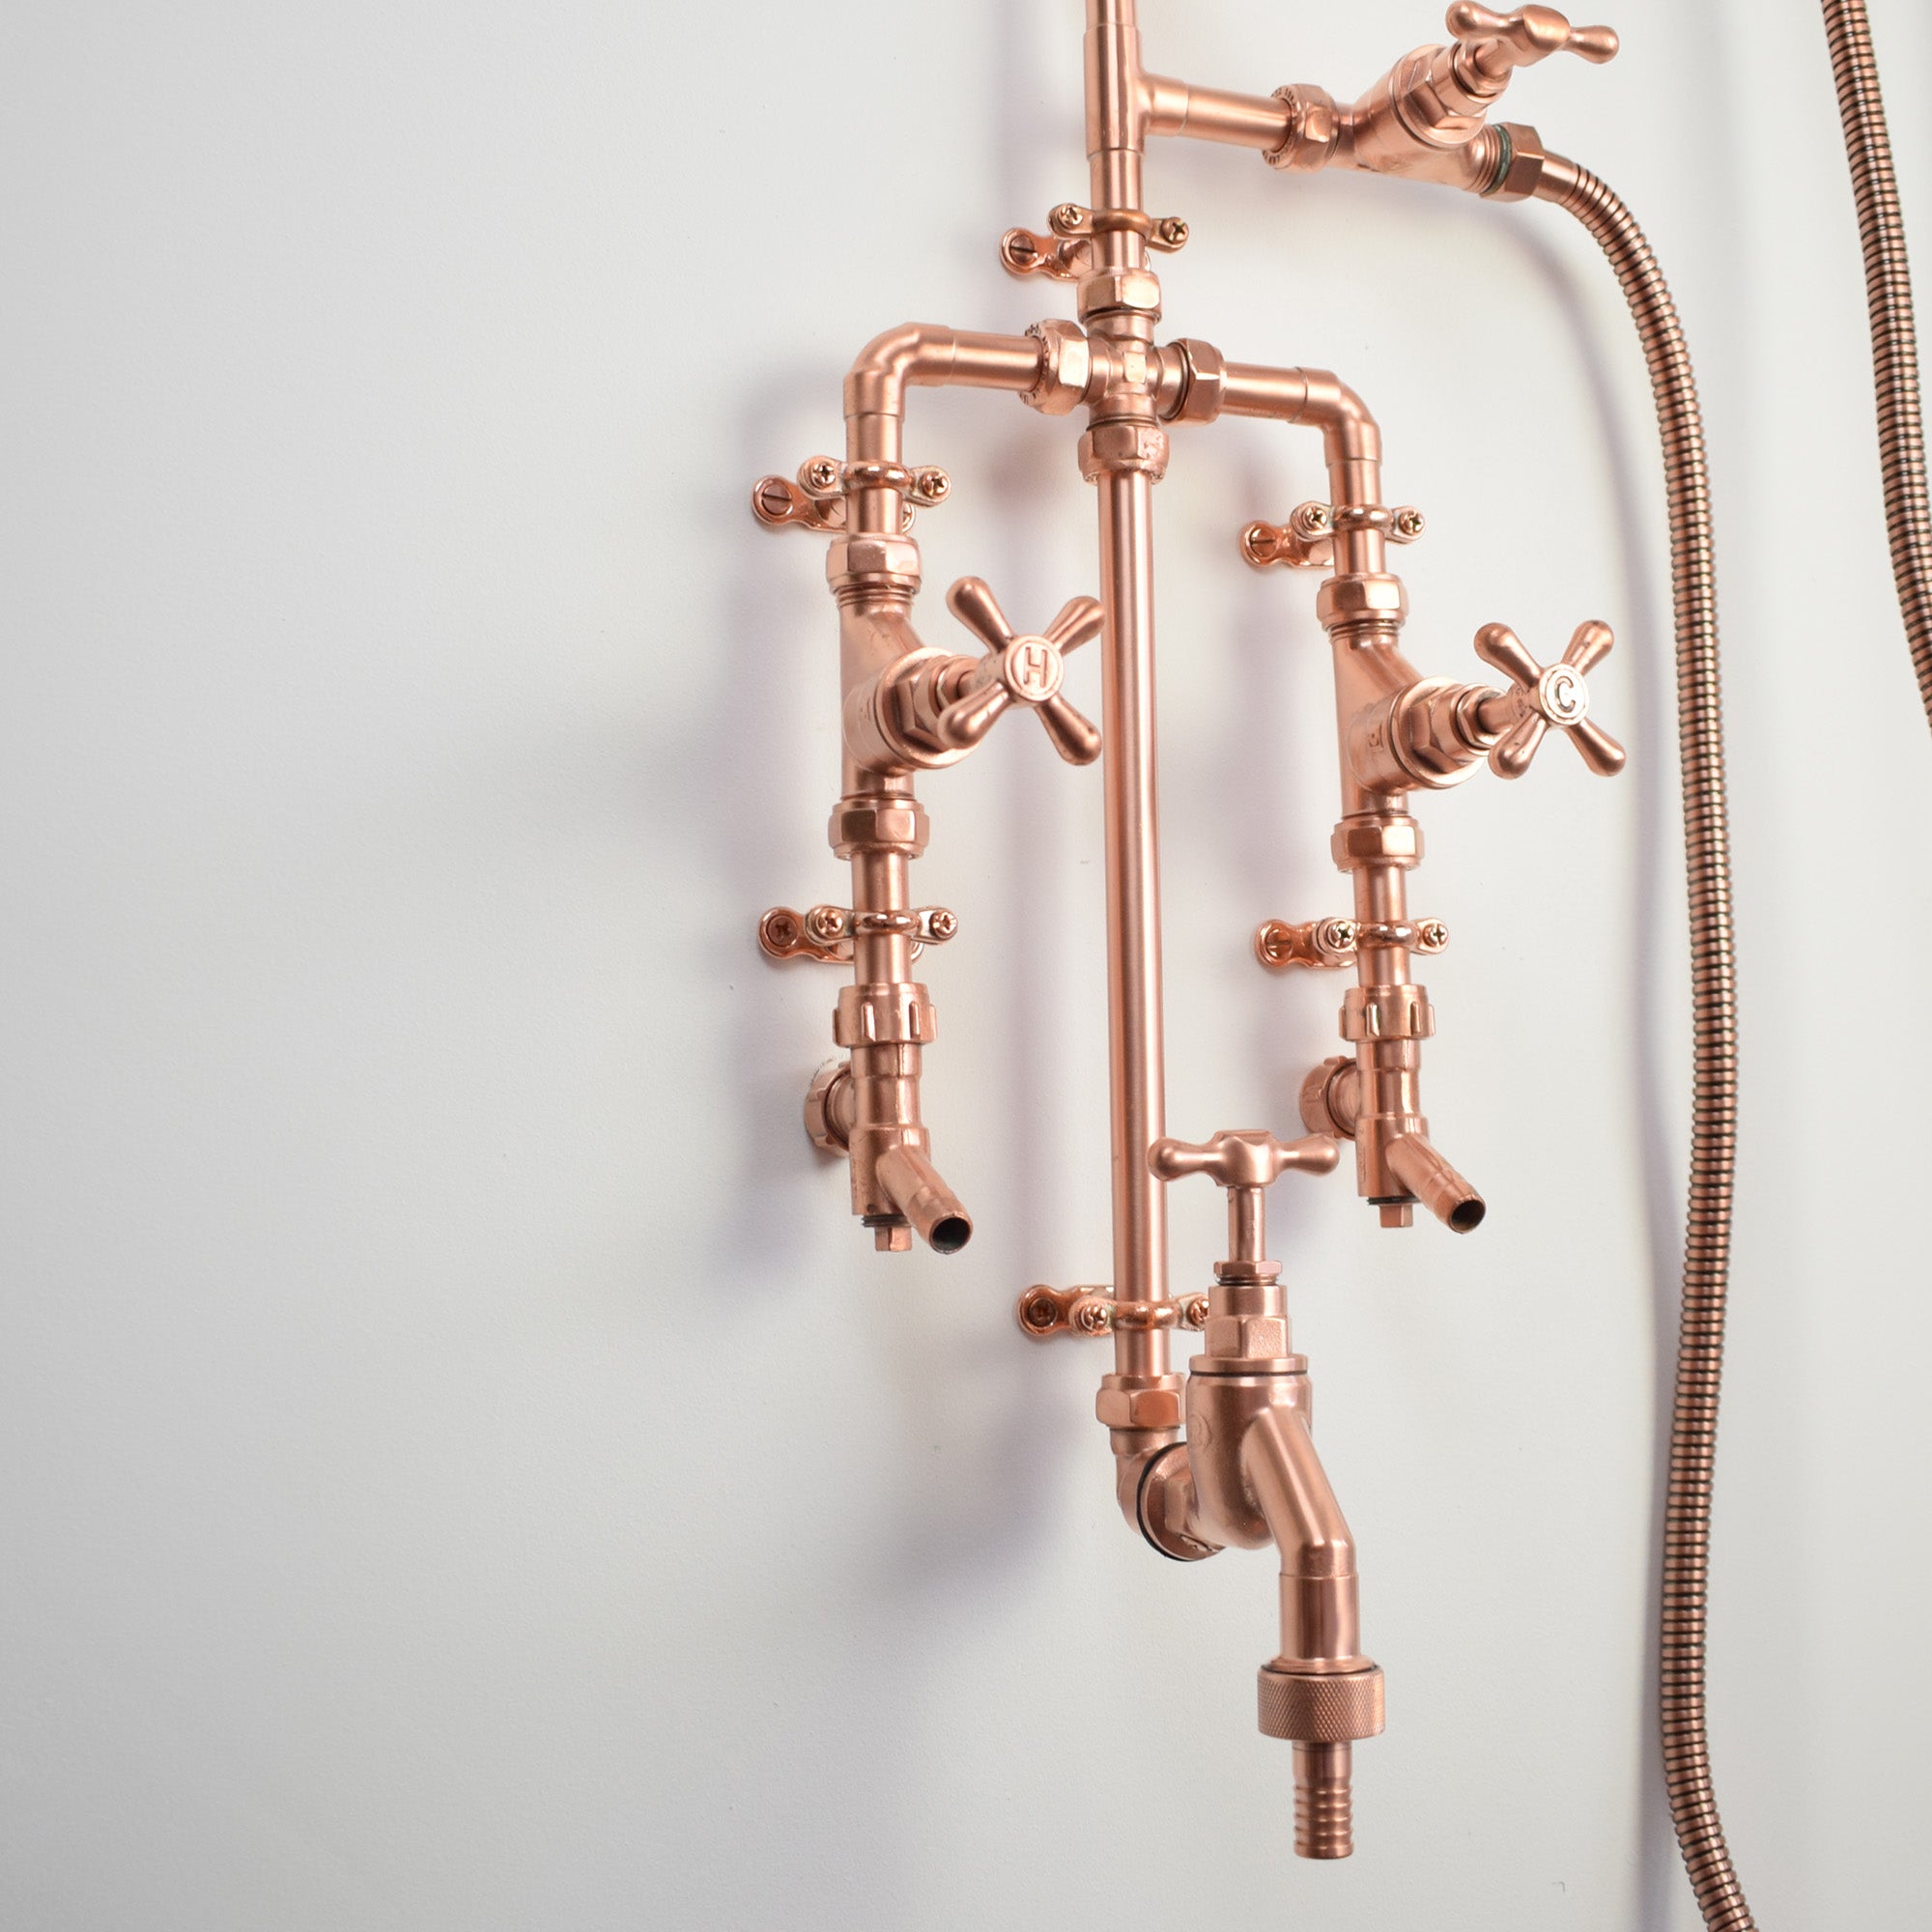 outdoor shower kit and hand shower made from genuine copper, perfect for your garden pool, beach house or backyard oasis